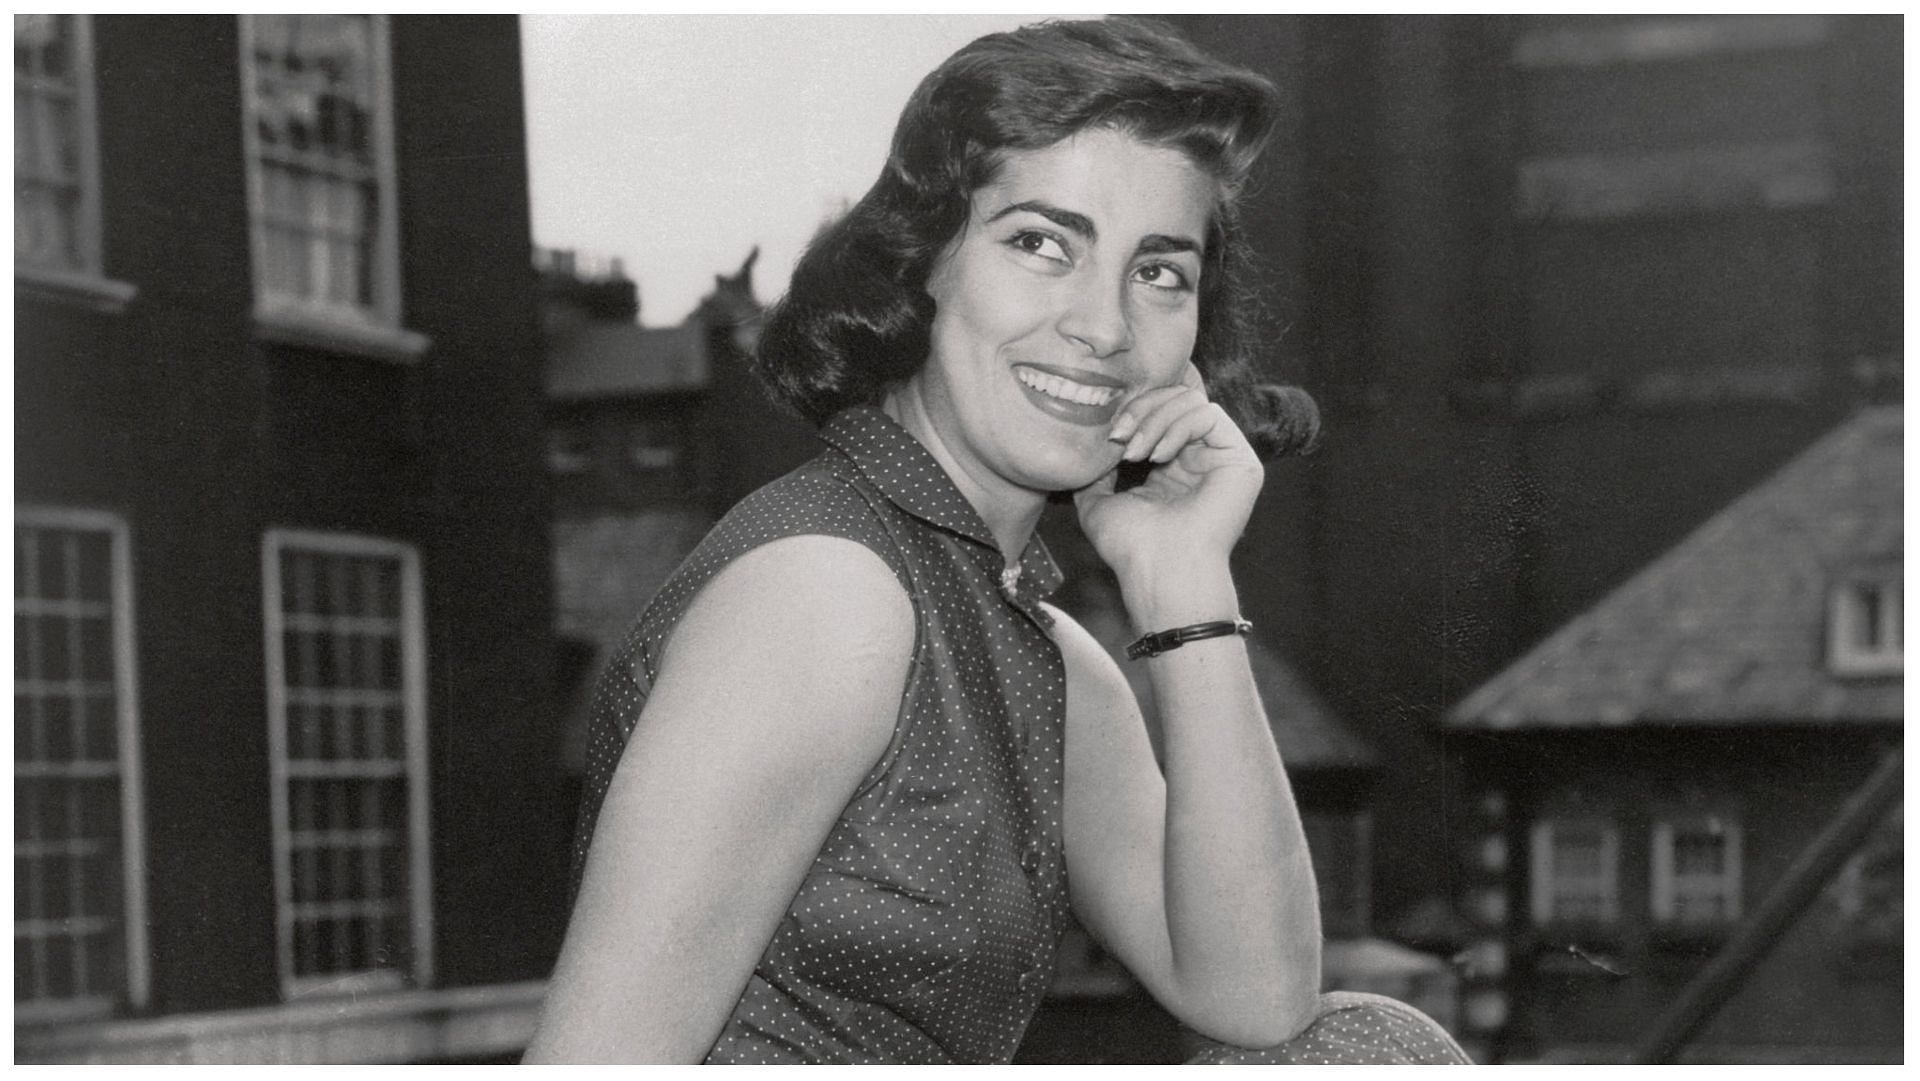 Irene Papas is a popular actress and singer (Image via Getty Images)